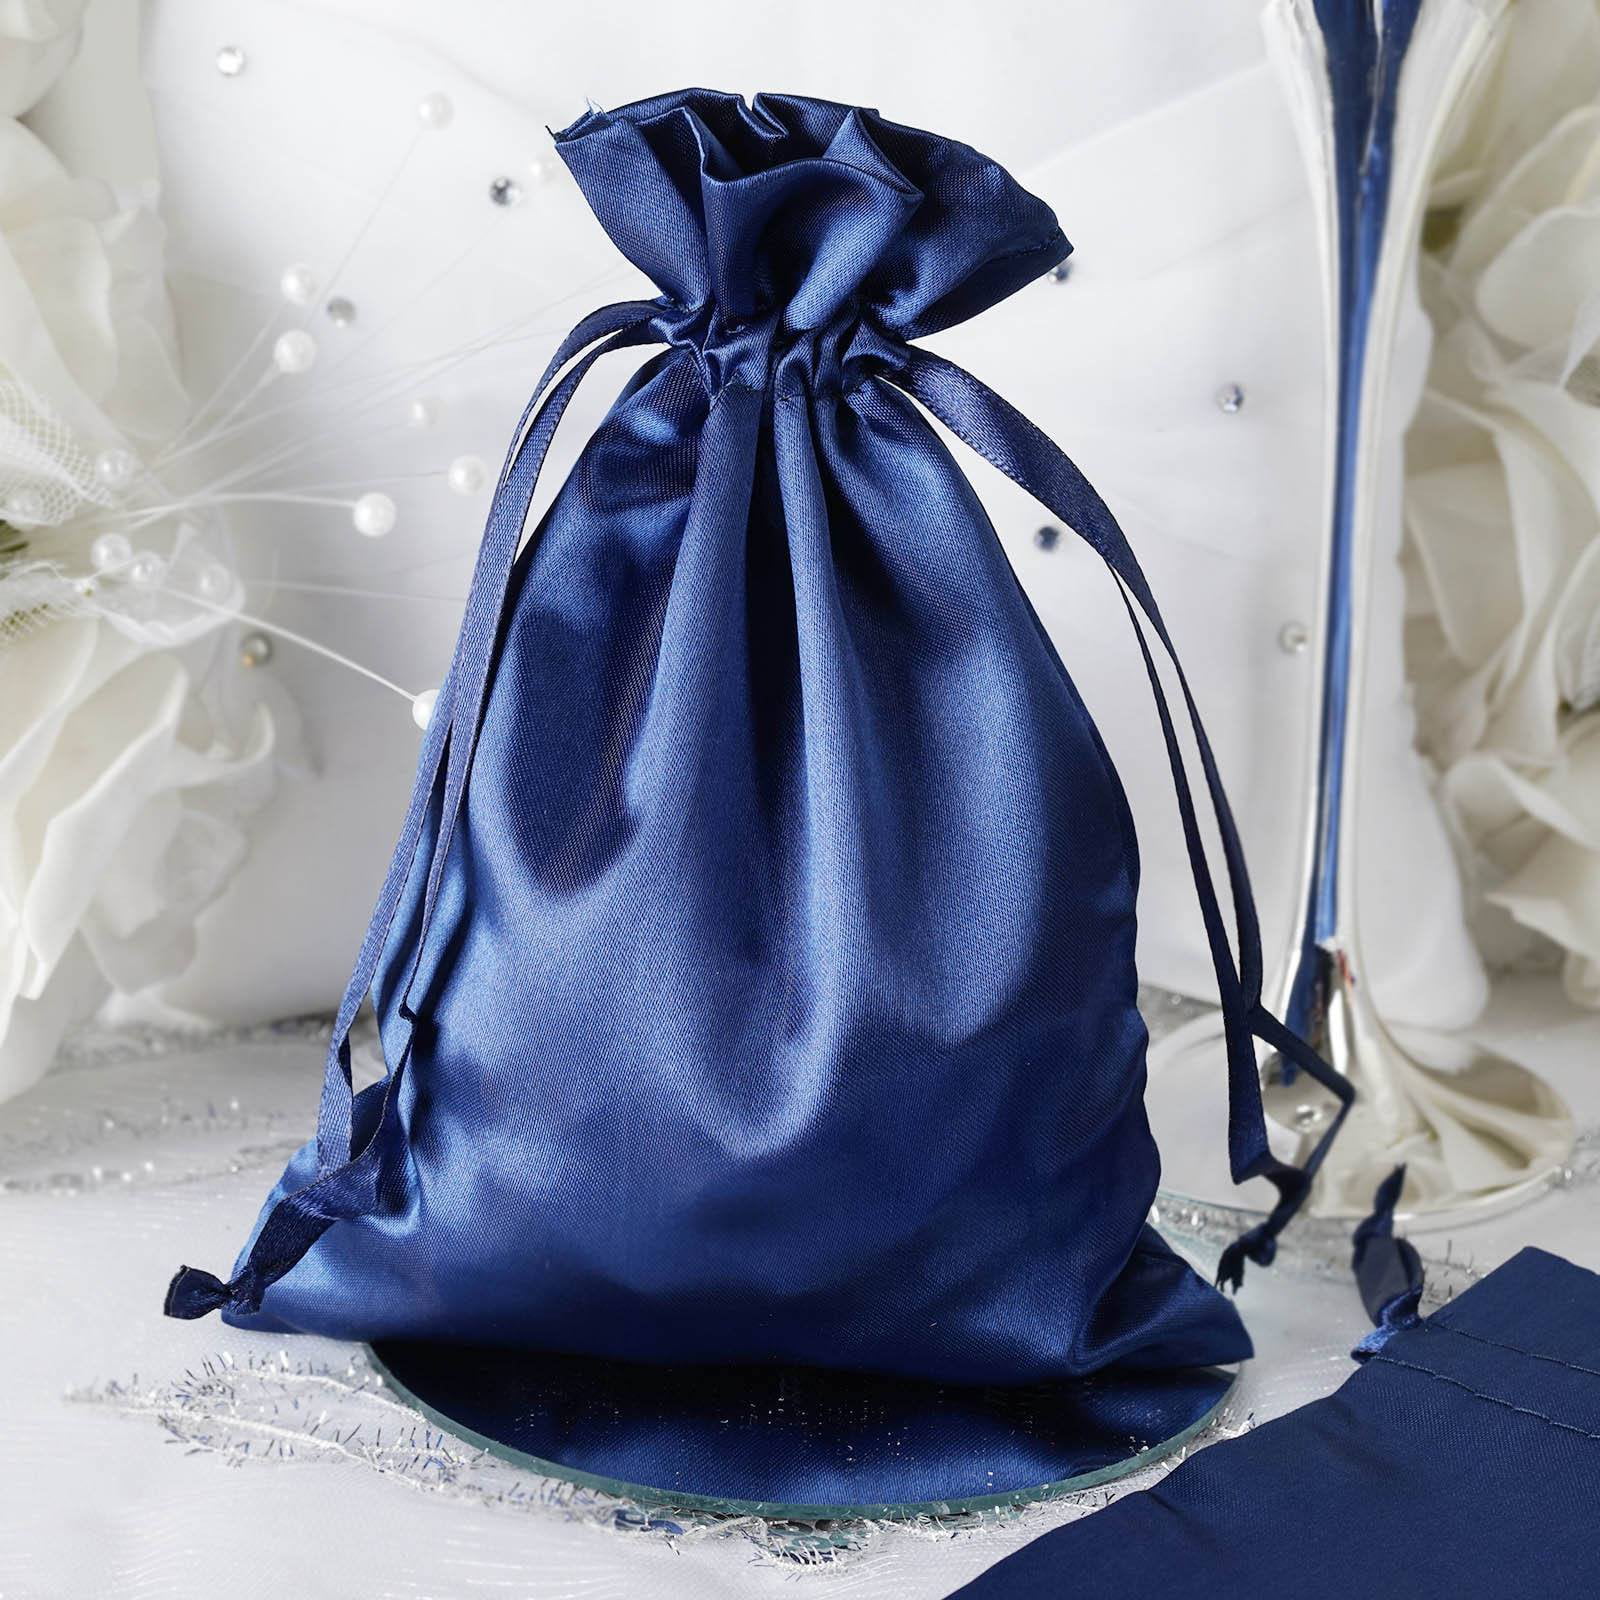 Efavormart 12PCS Satin Gift Bag Drawstring Pouch for Wedding Party